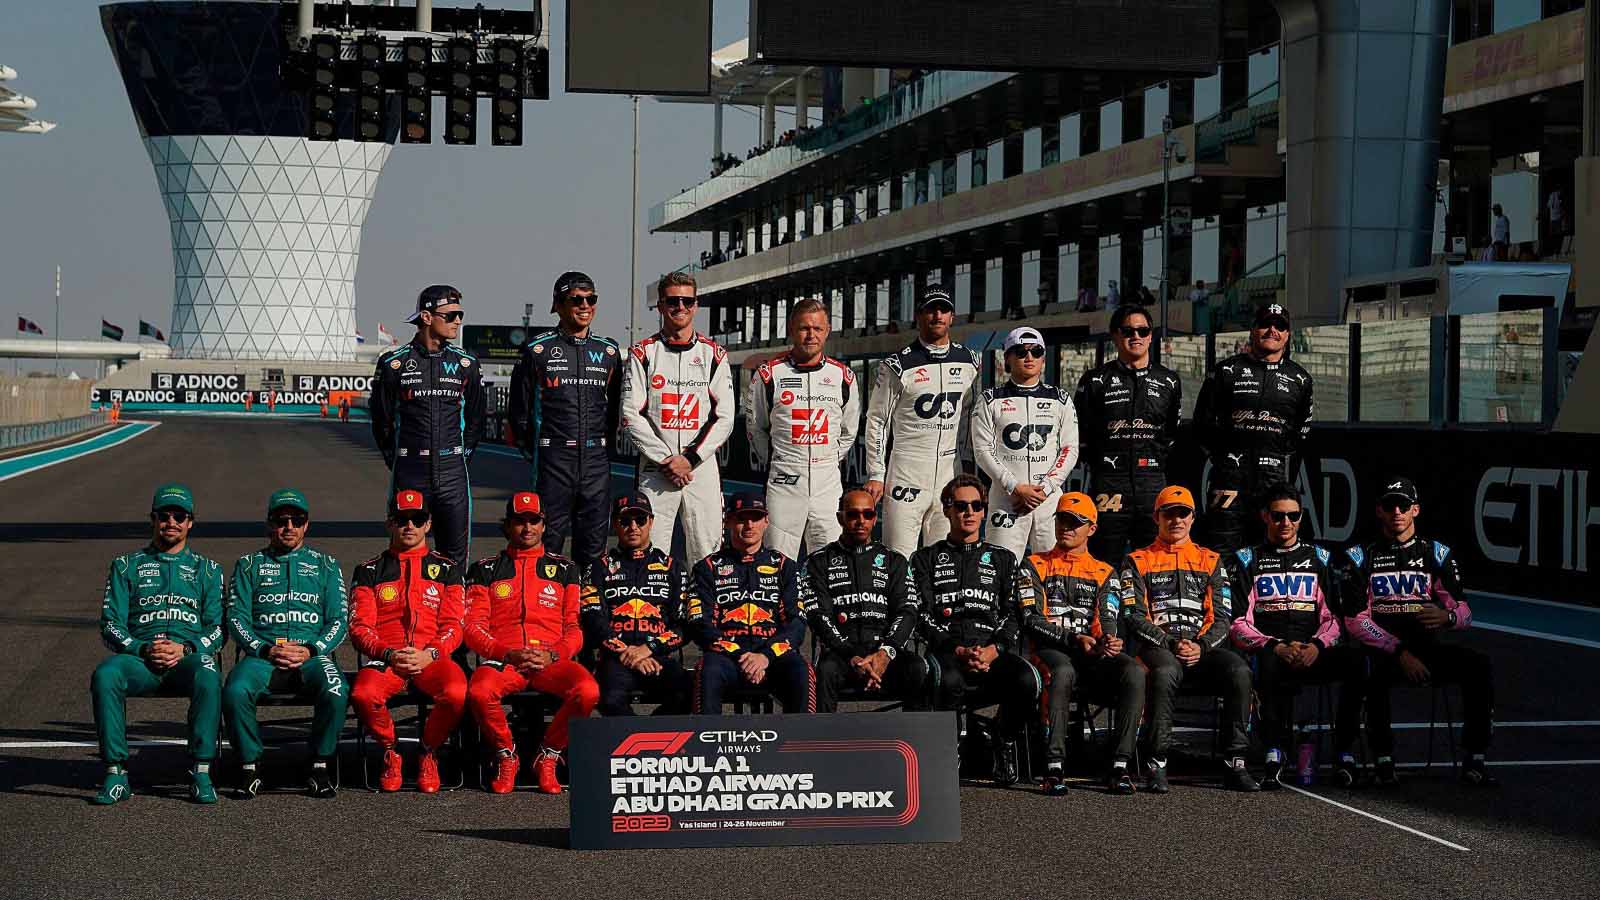 2024 F1 grid all lineups and drivers for next Formula 1 season